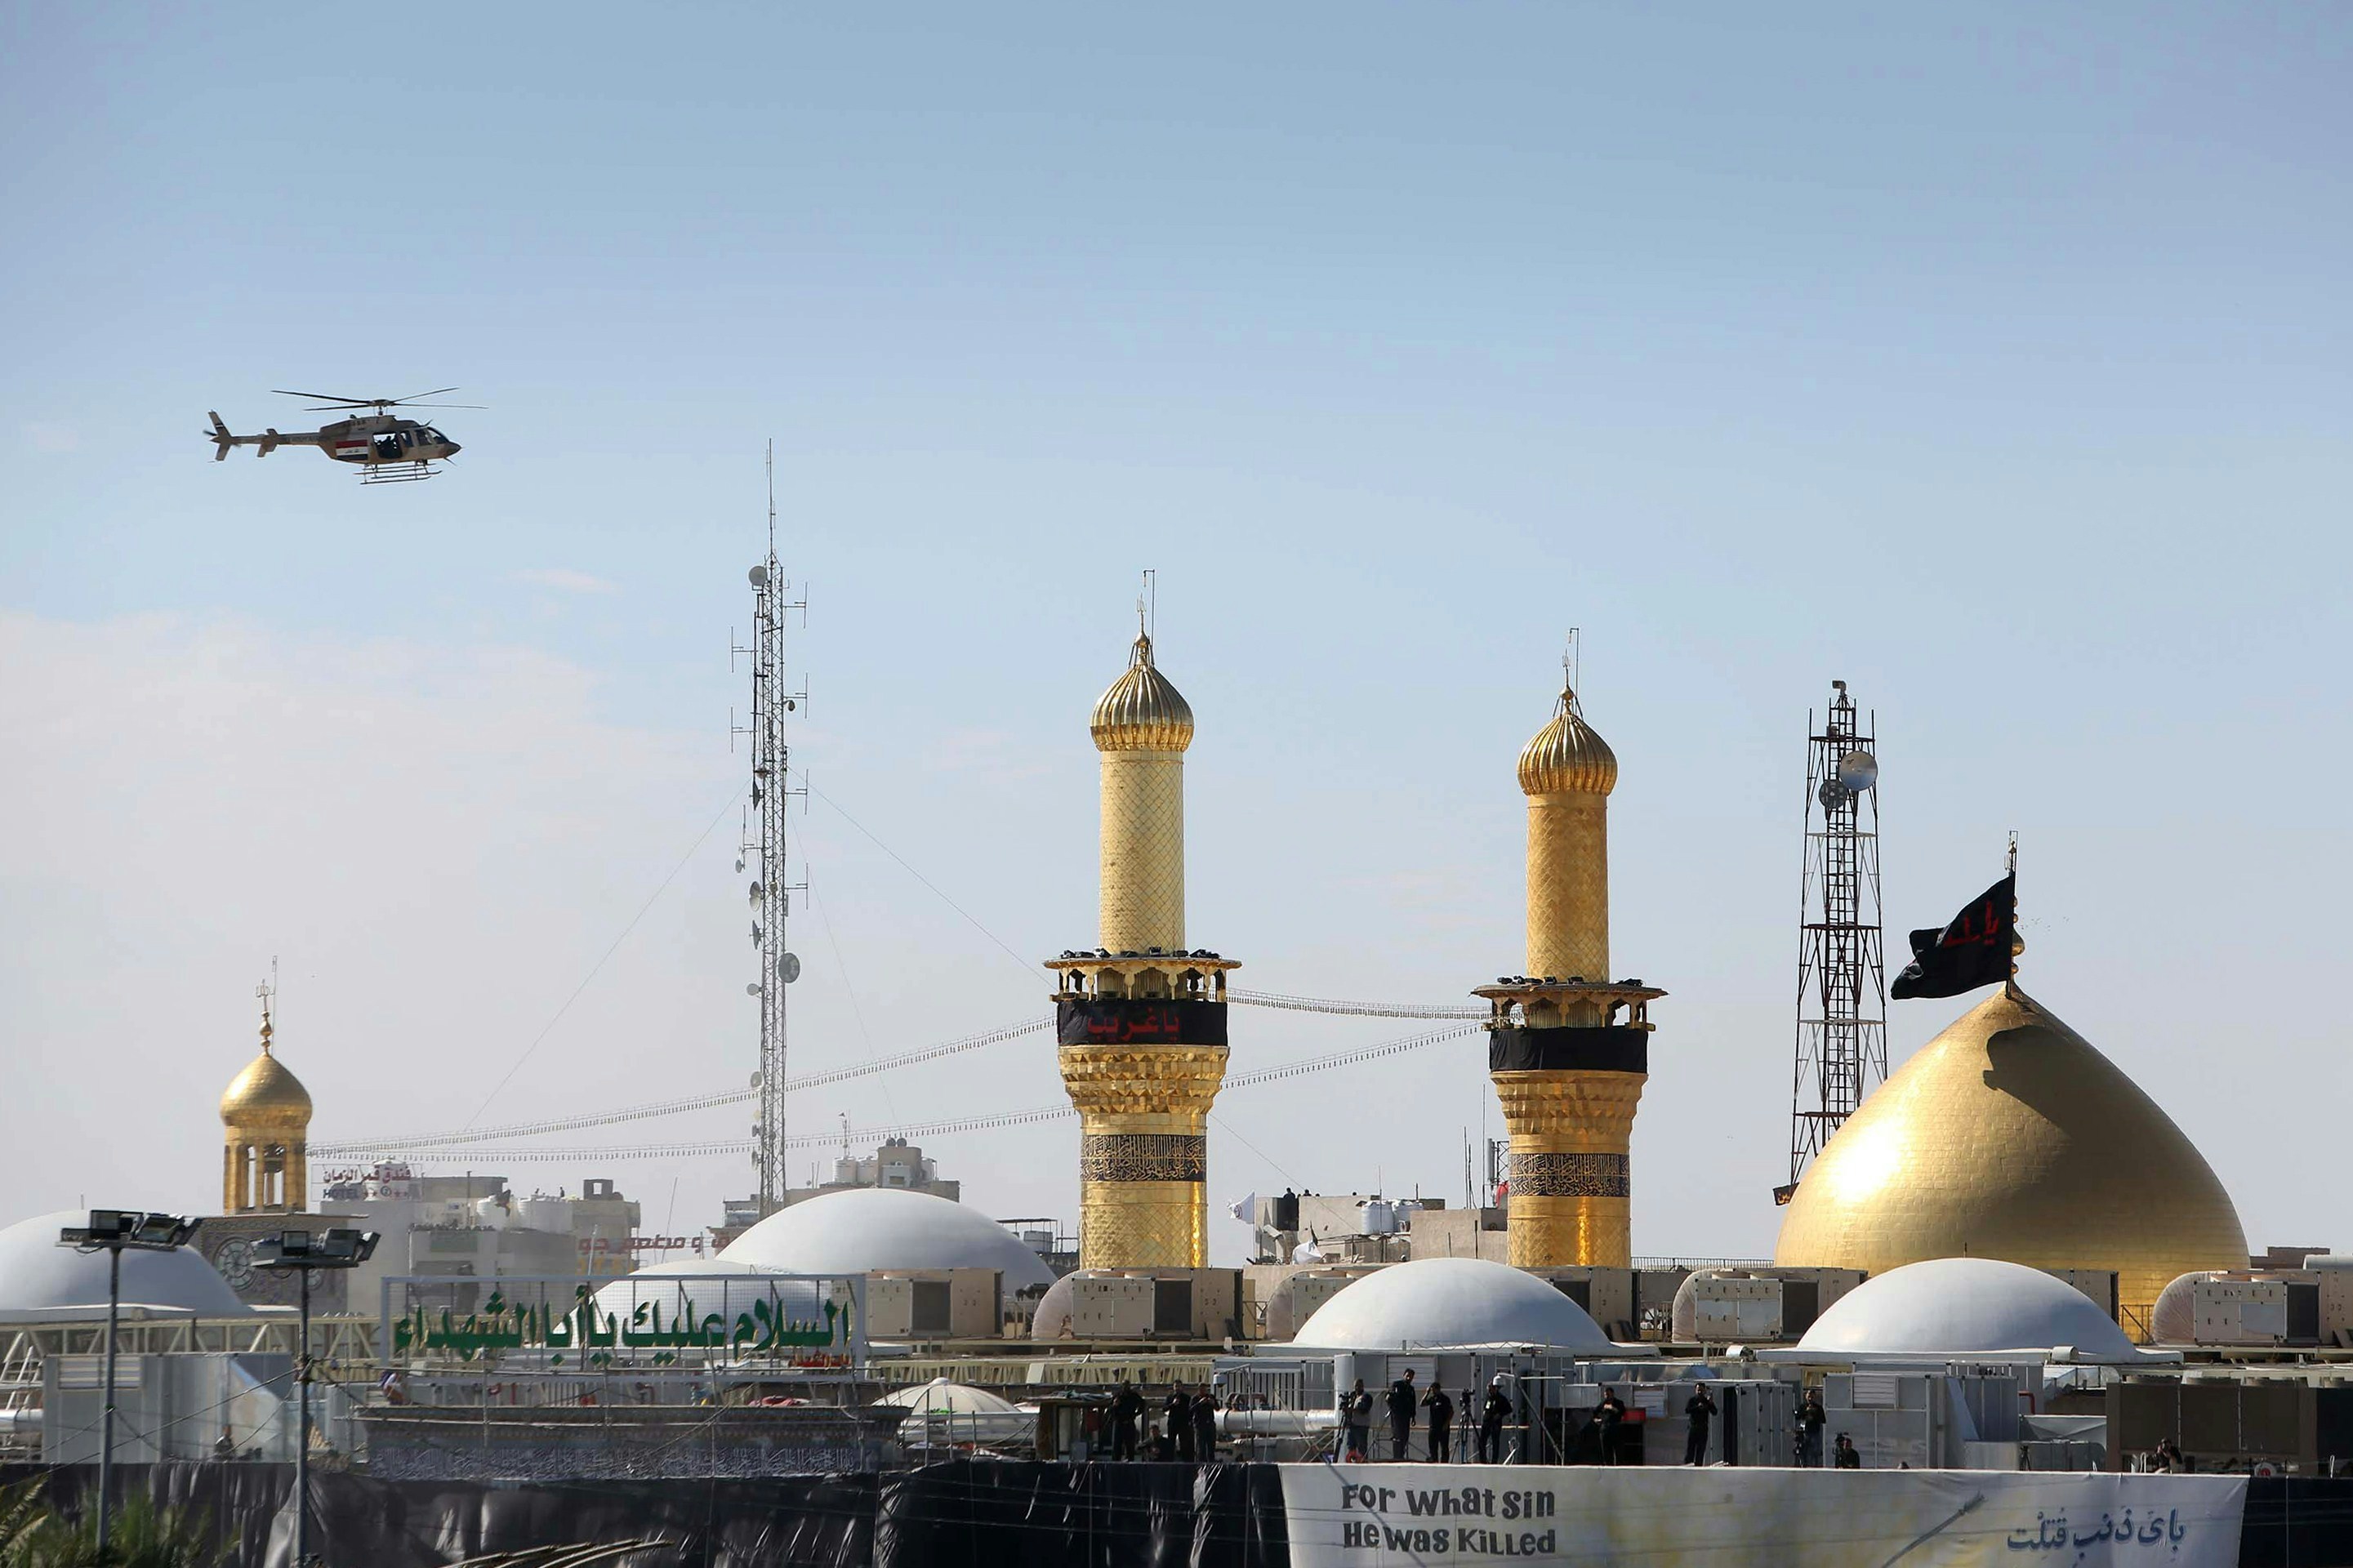 An helicopter flies over the shrine of Imam Hussein during the Ashura commemorations that mark his killing on November 4, 2014 in the central city of Karbala, Iraq.